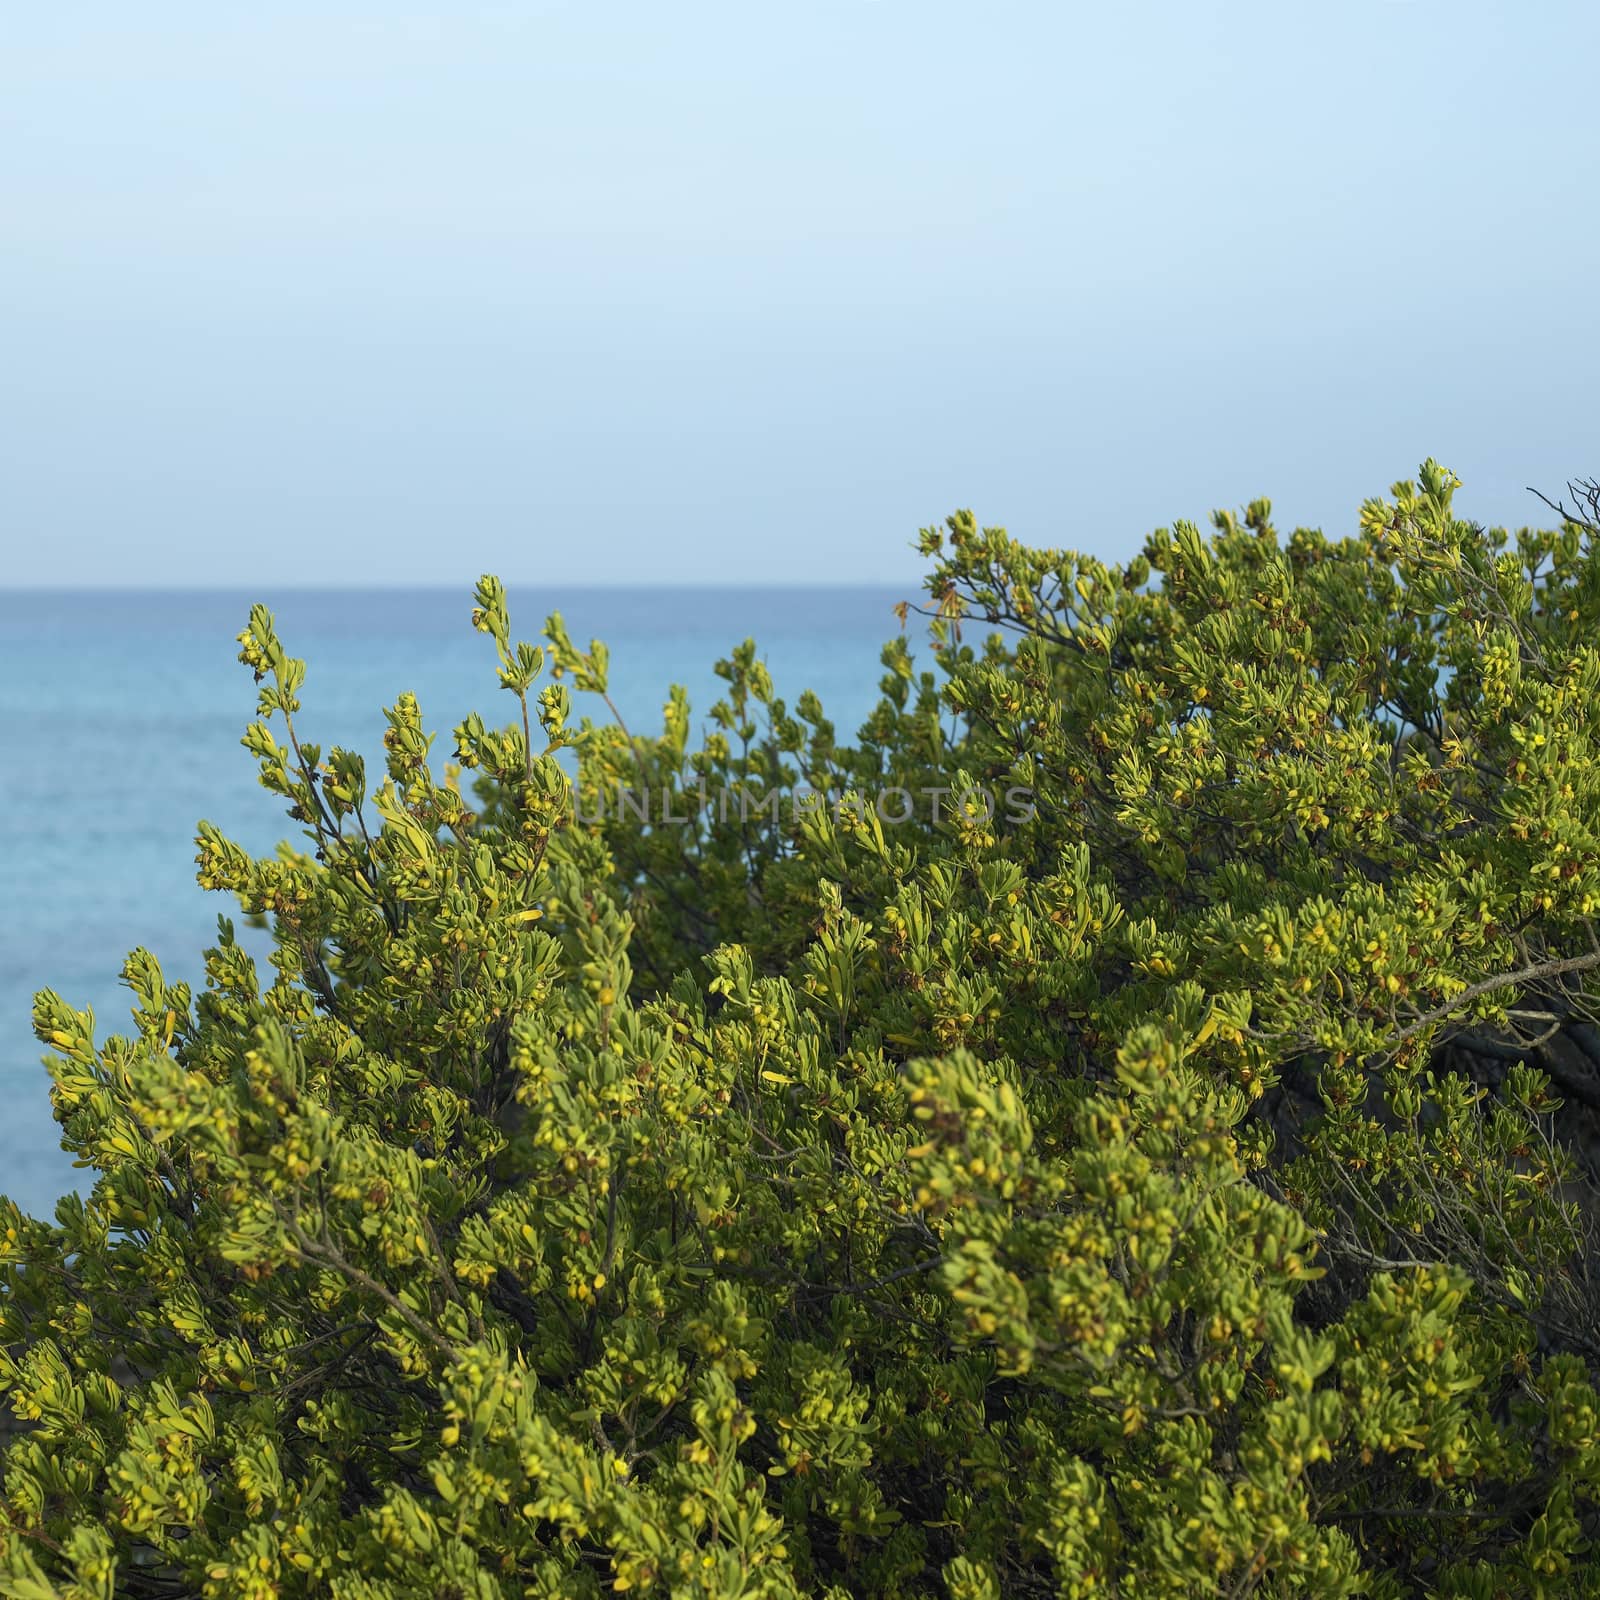 Green bushes on a cliff with blue ocean